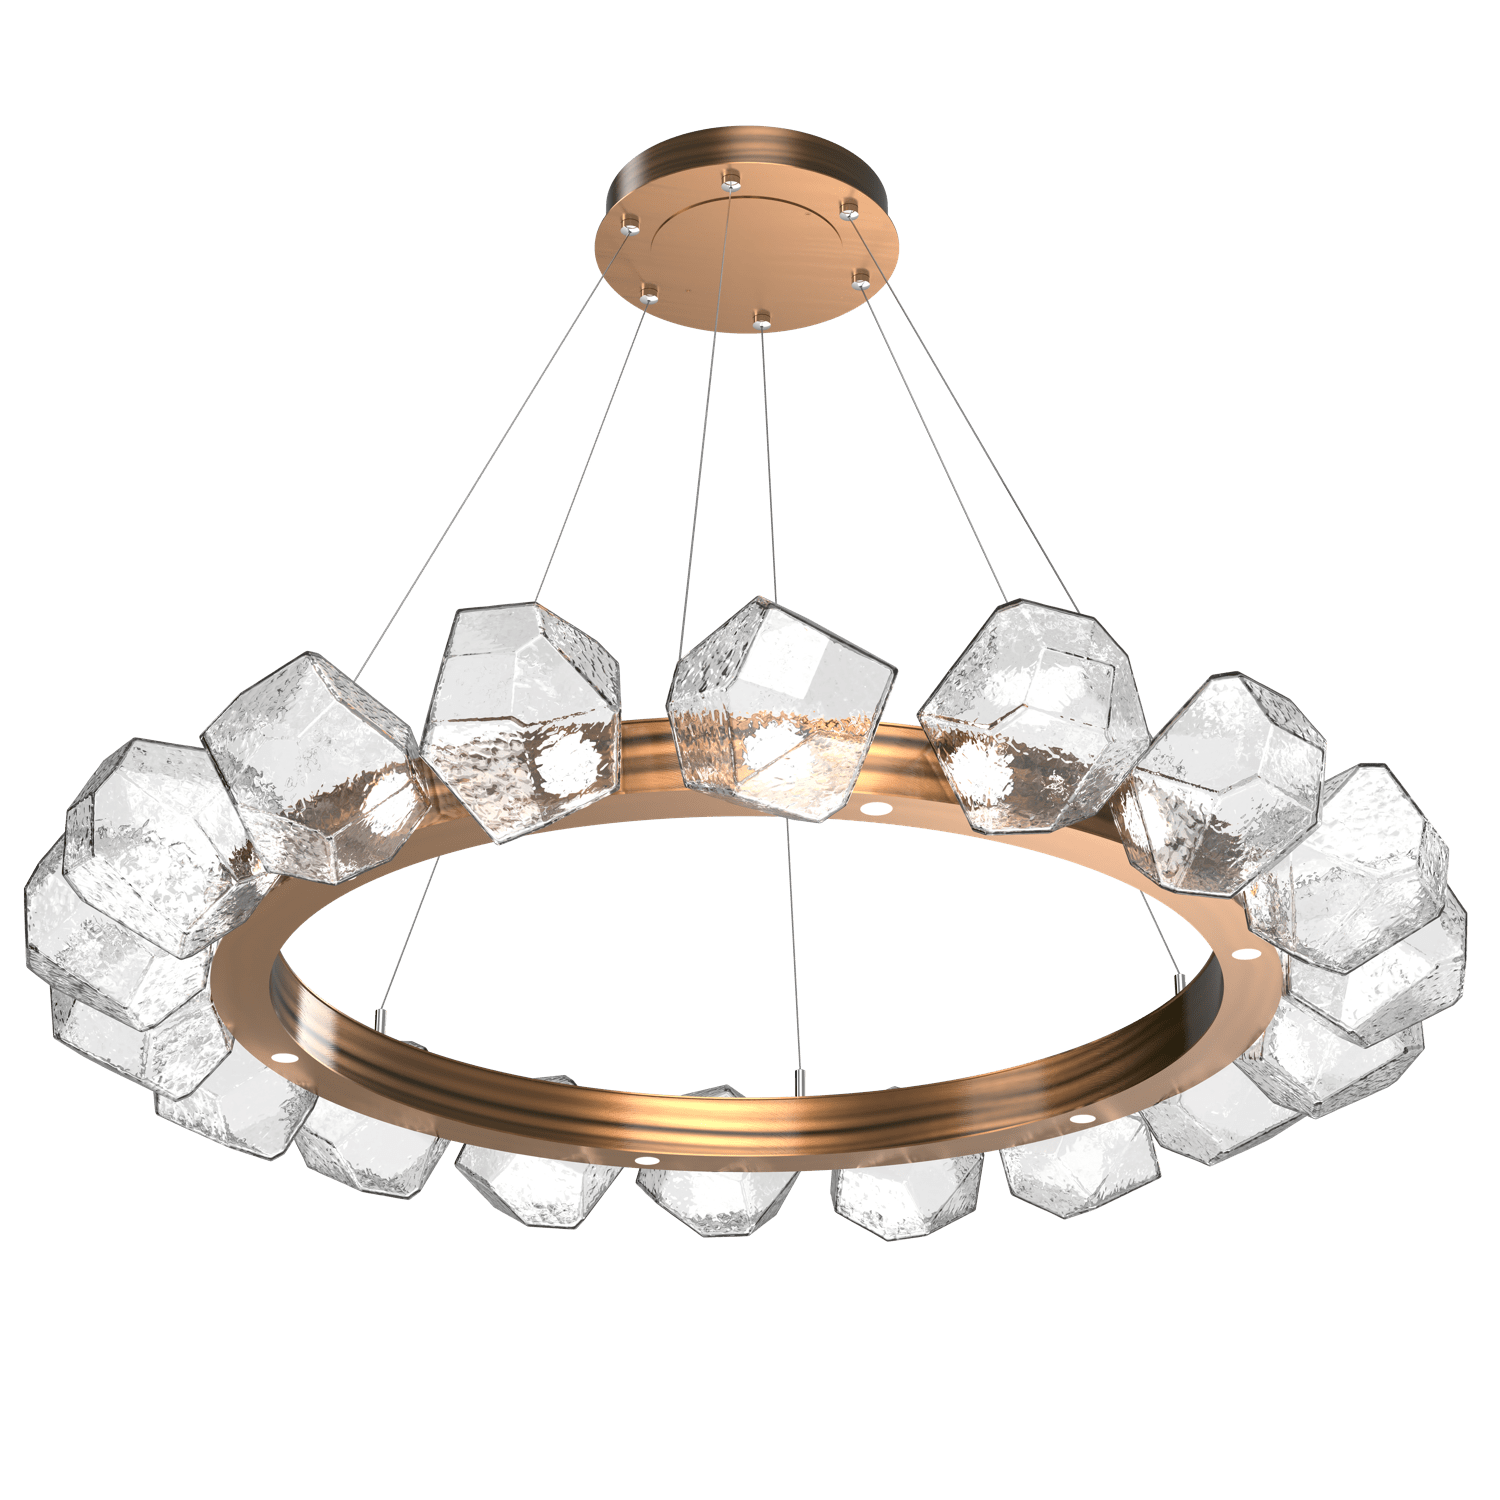 CHB0039-48-RB-C-Hammerton-Studio-Gem-48-inch-radial-ring-chandelier-with-oil-rubbed-bronze-finish-and-clear-blown-glass-shades-and-LED-lamping